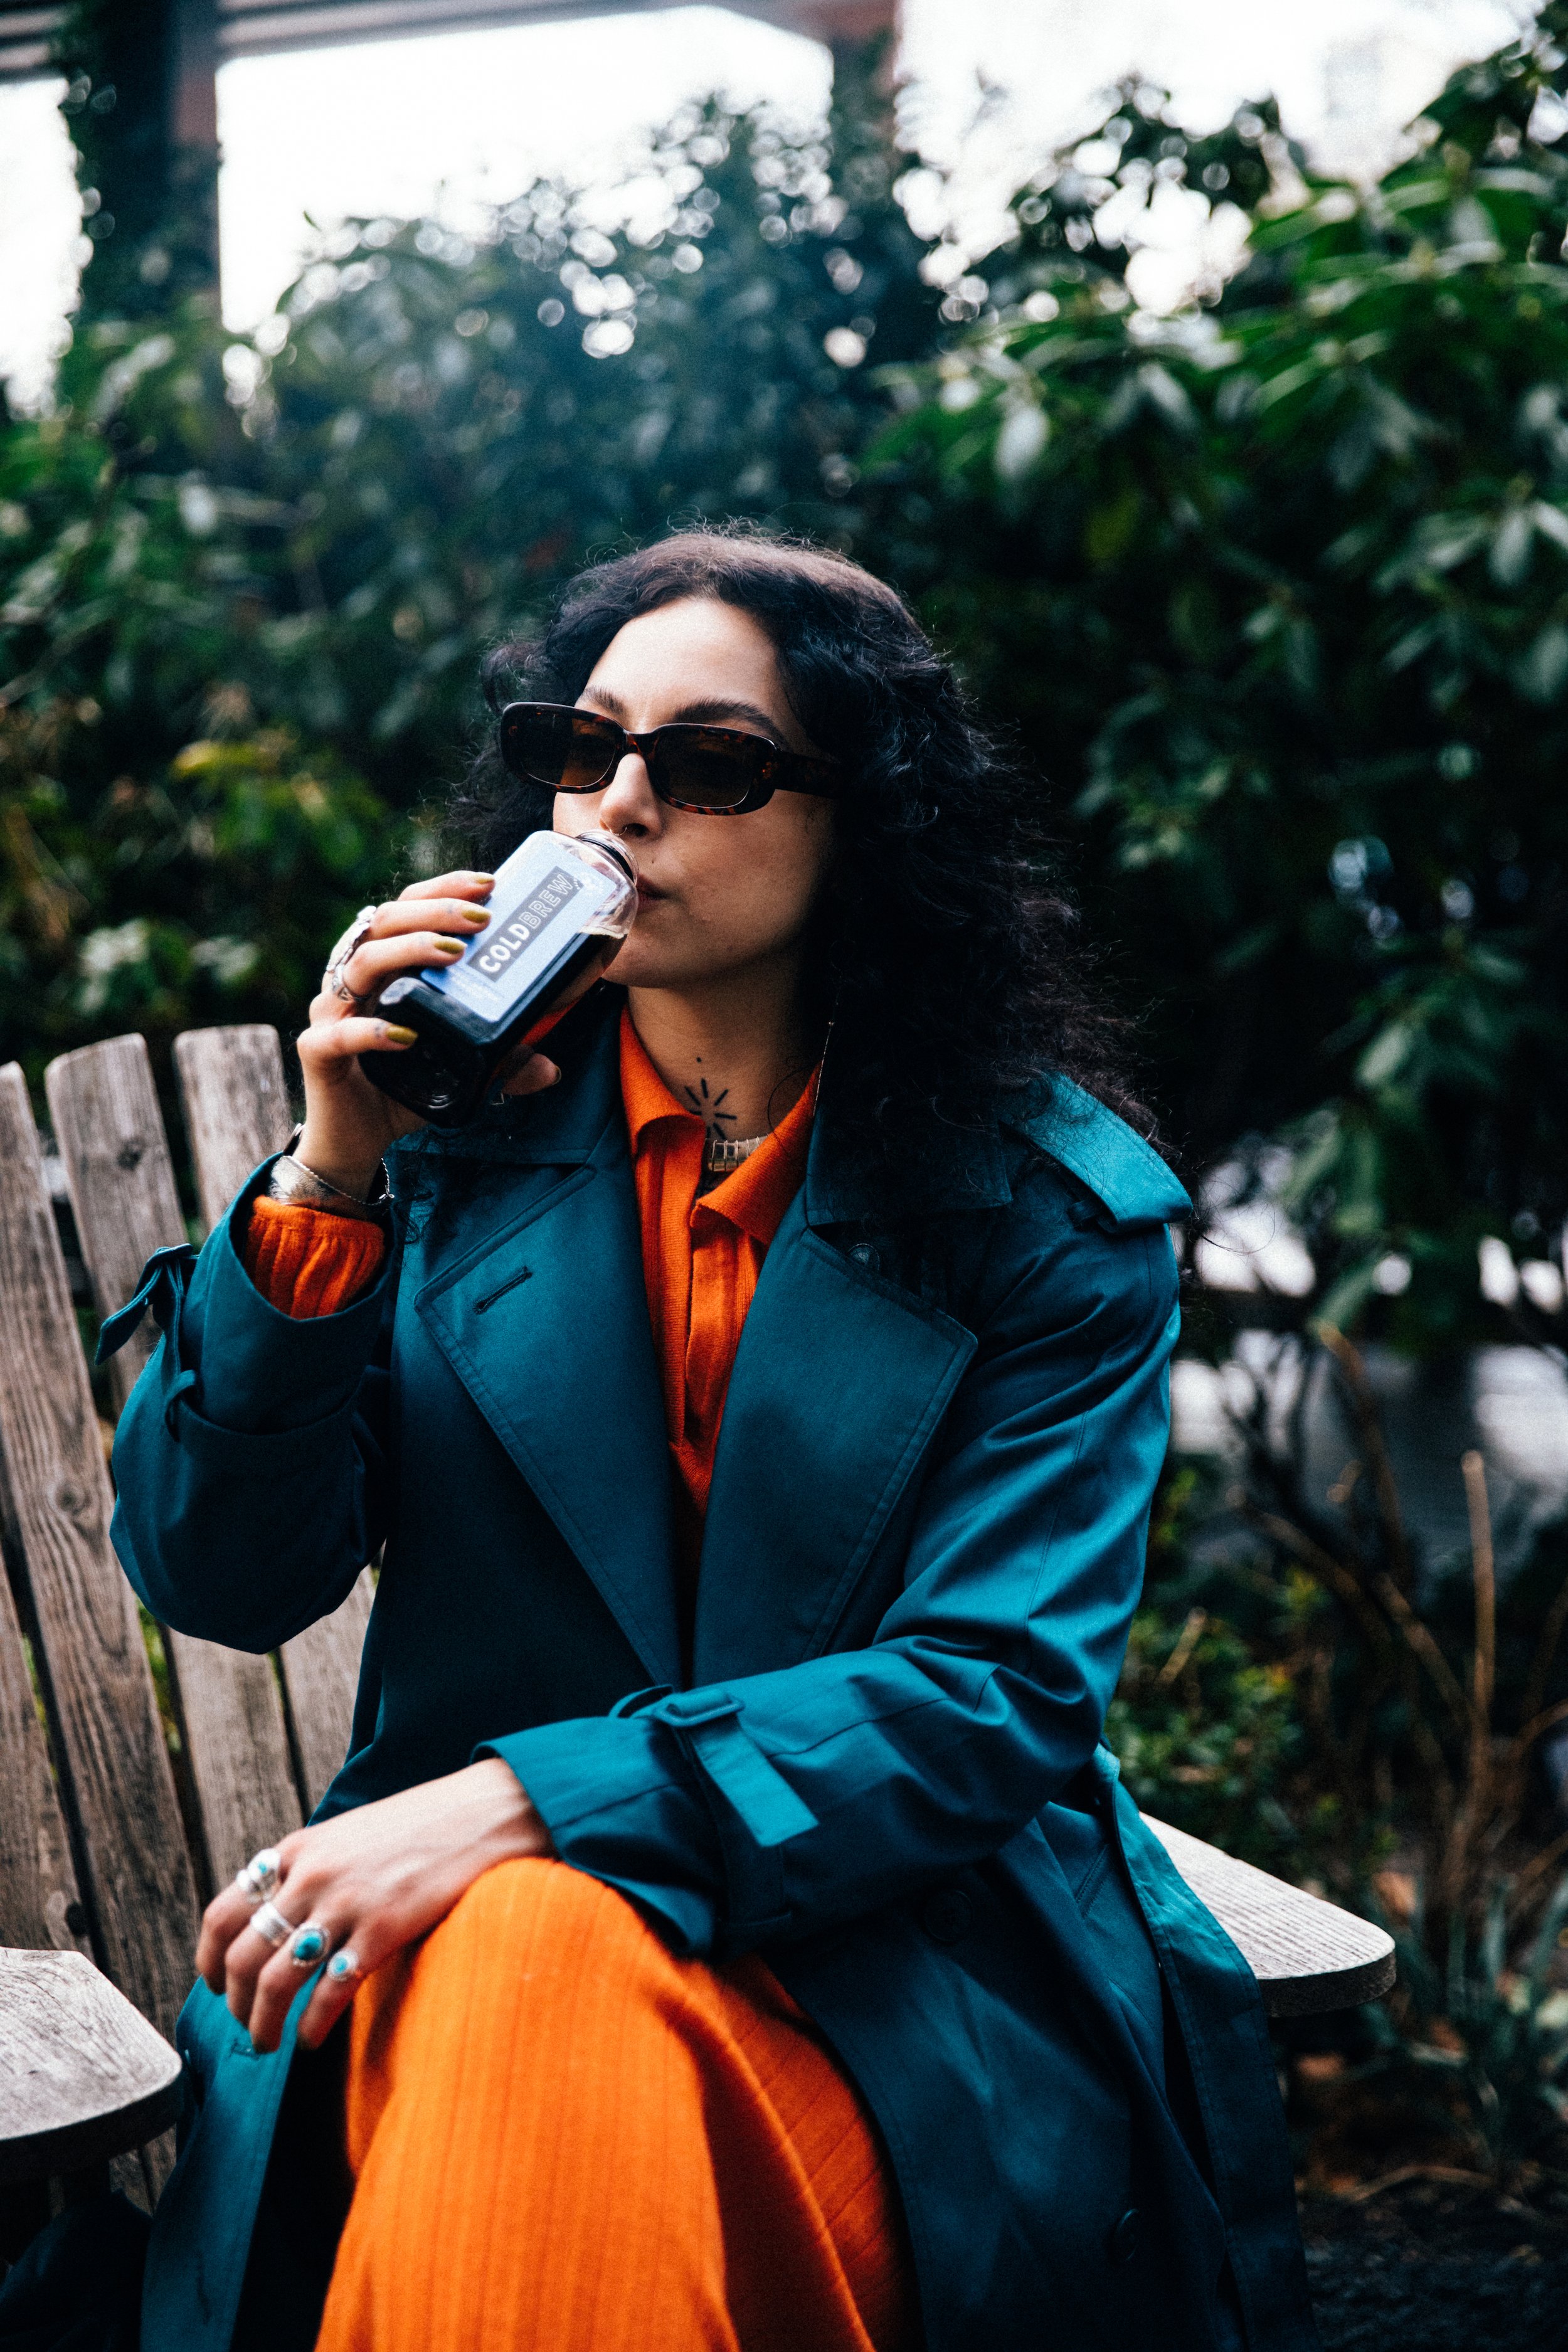 Sitting on a Chair Drinking Bean2Bean Cold Brew, Photo by Corey Jermaine